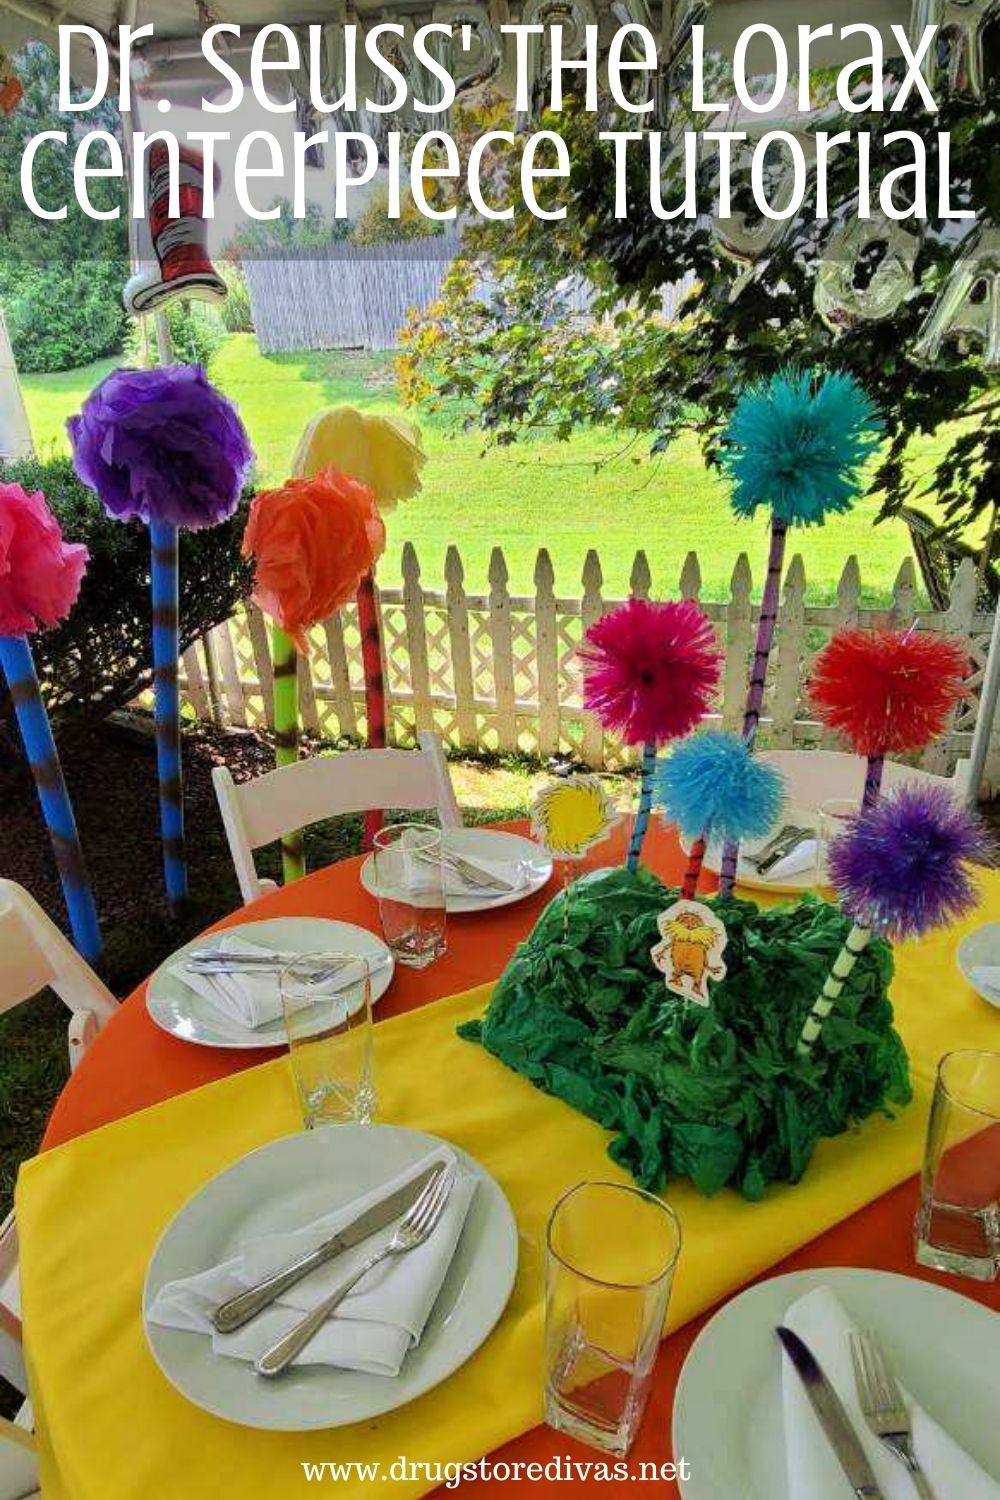 Enhance your Dr. Seuss party and make the centerpiece from this Dr. Seuss' The Lorax Centerpiece tutorial.